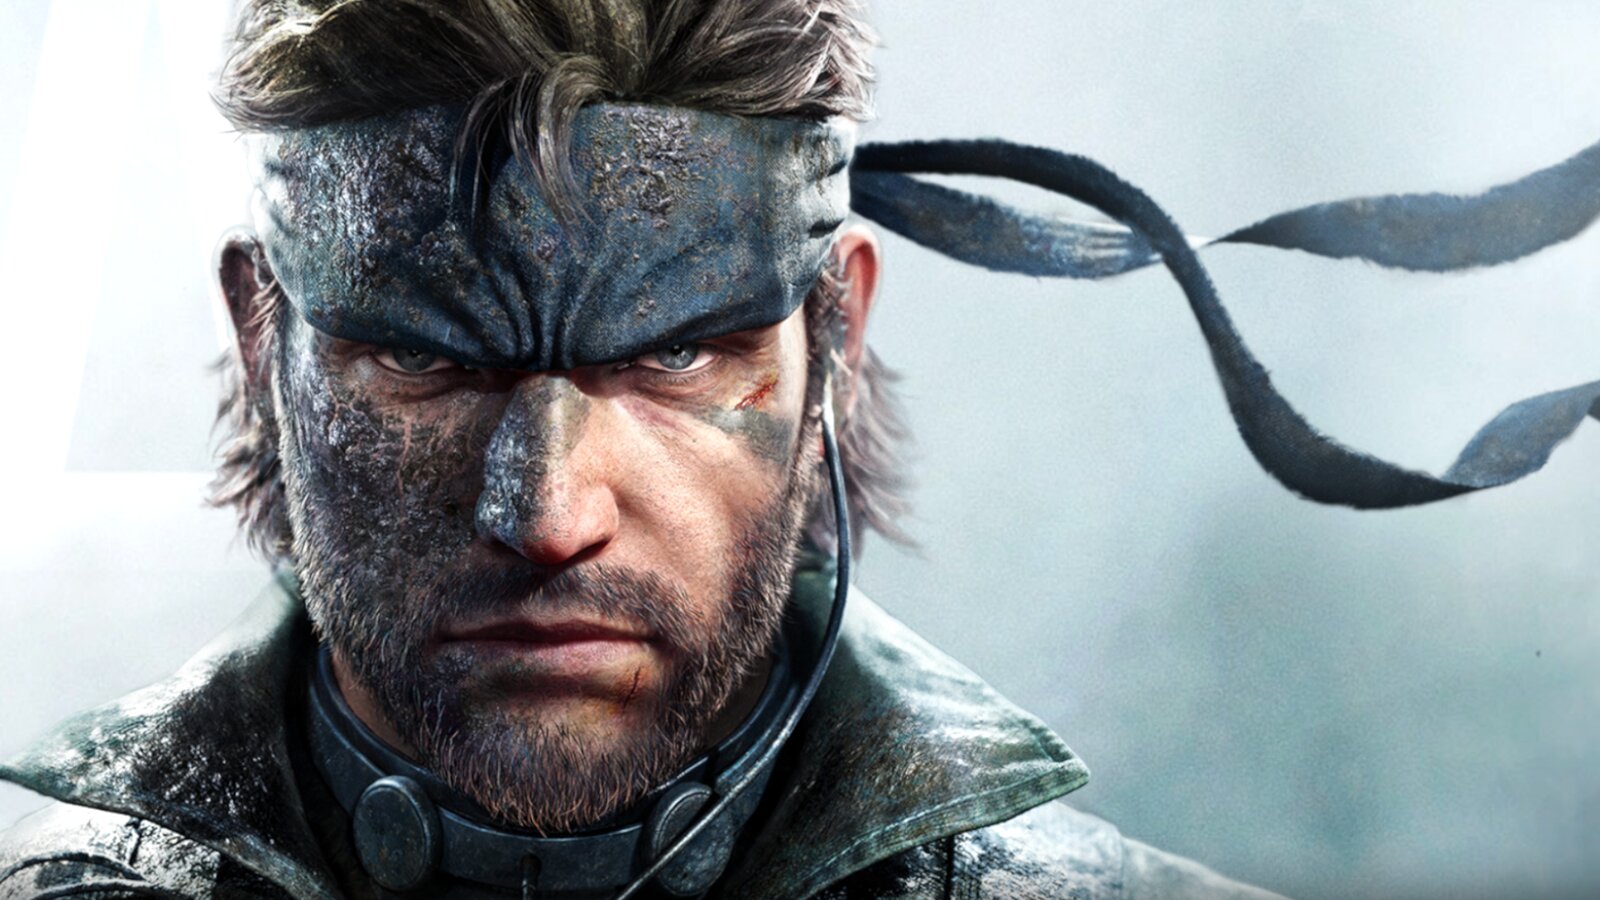 Metal Gear Solid Δ: Snake Eater - IGN